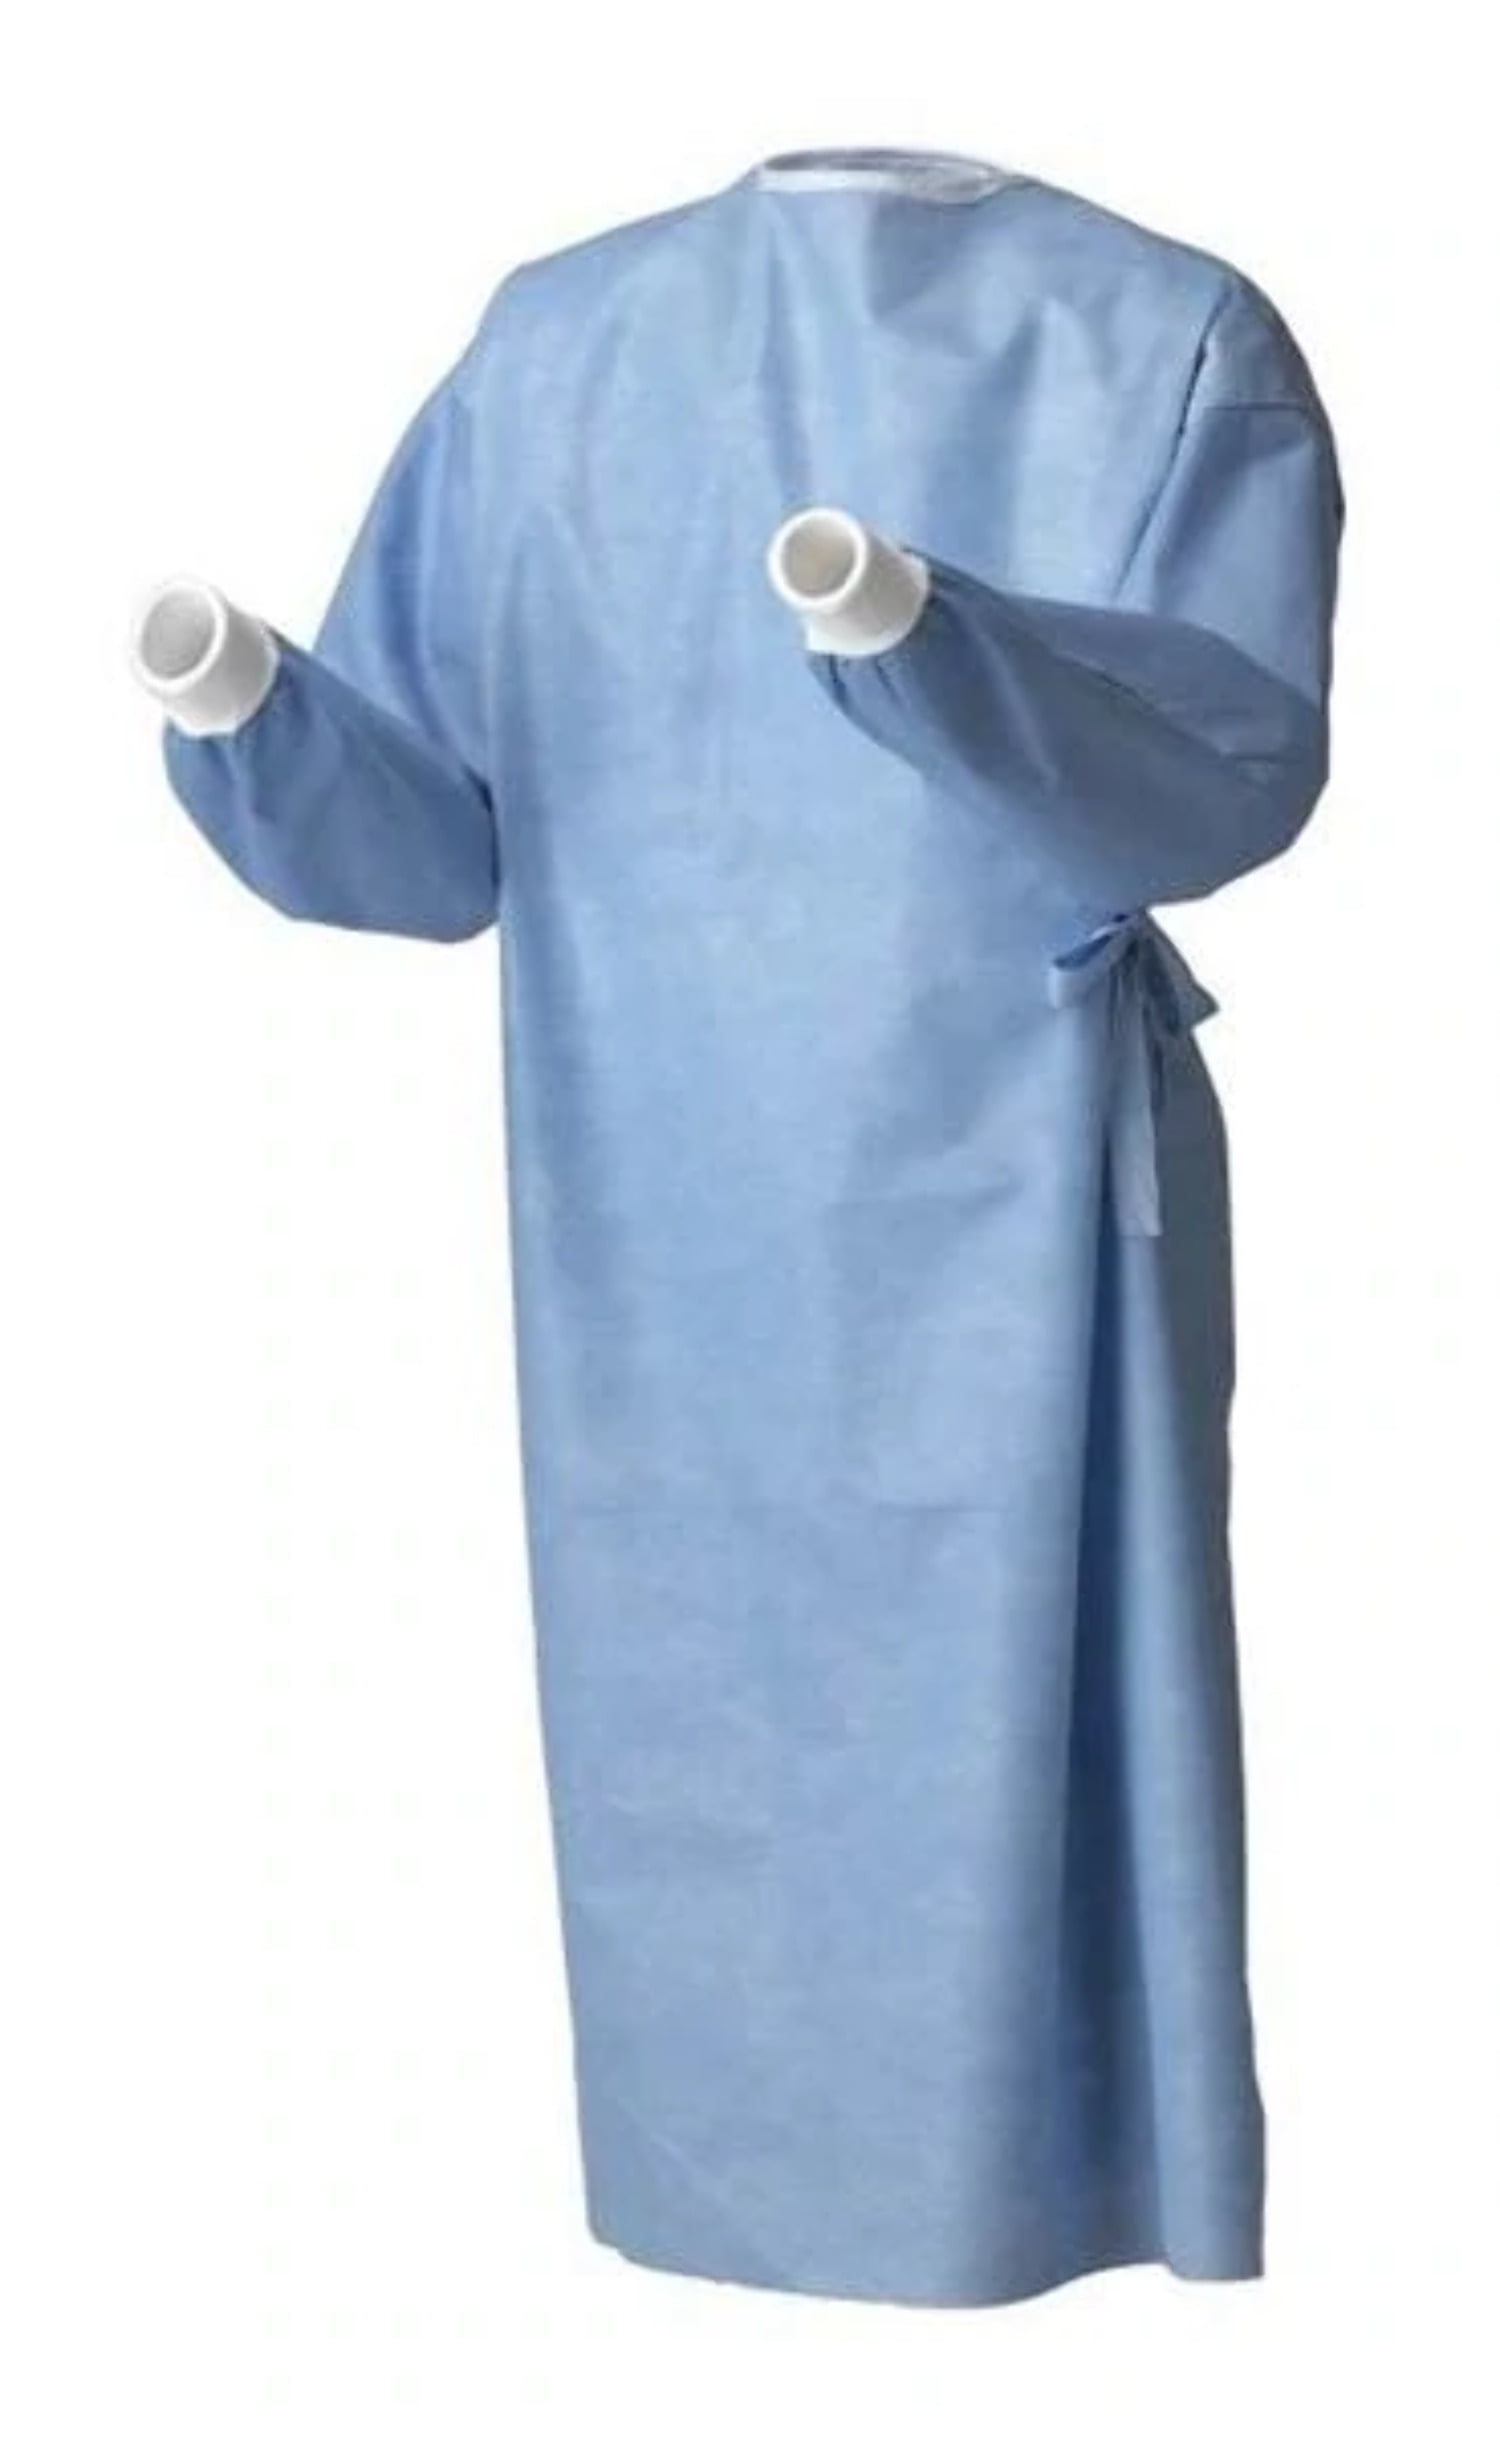 ProMax® Reusable Surgical Gowns | AAMI Level 4 Protection